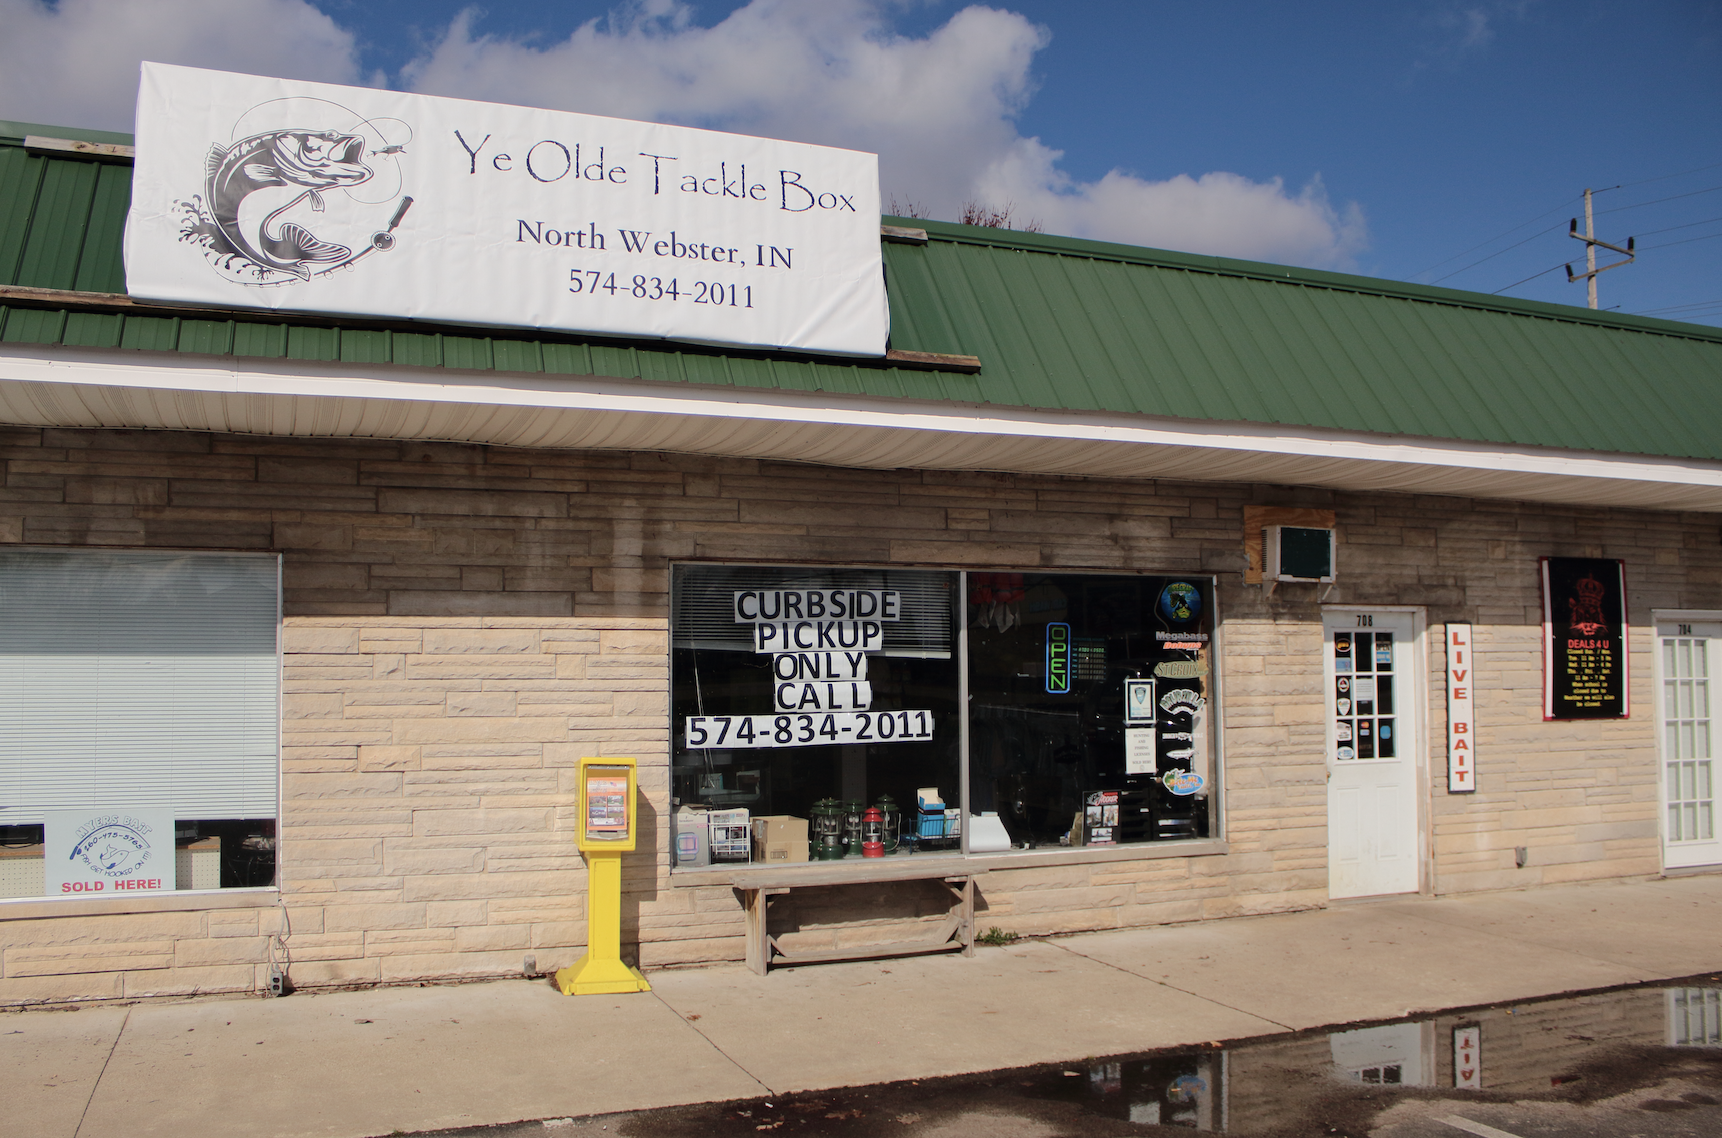 Ye Olde Tackle Box - Towne Post Network - Local Business Directory